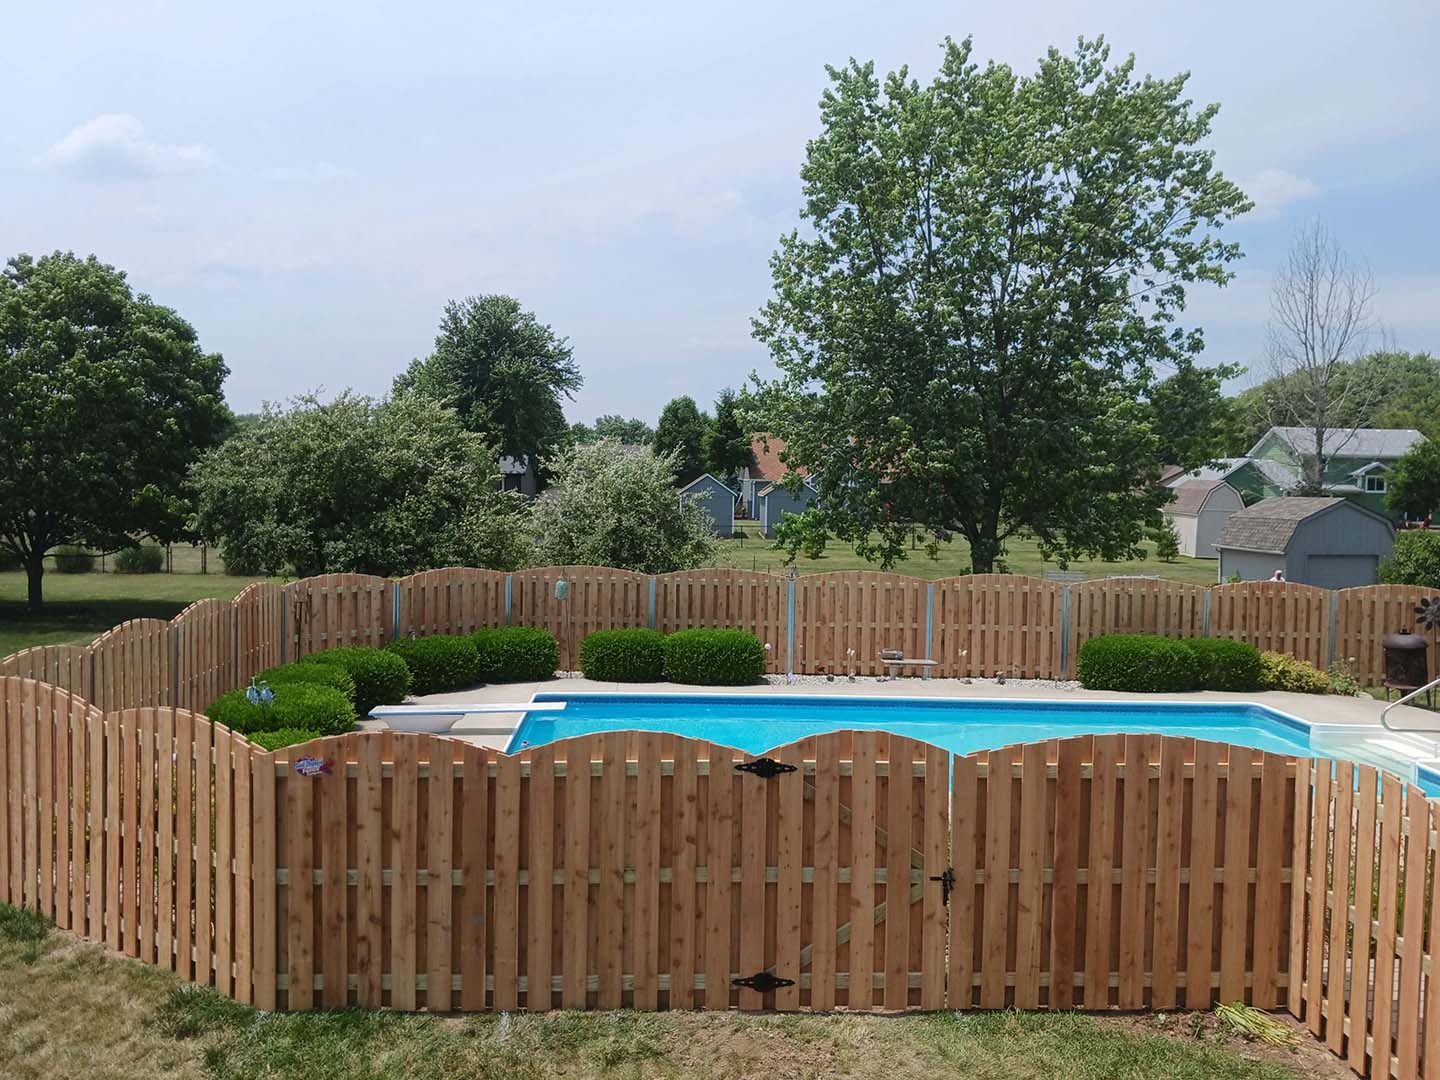 No dig pool wood fence company in the Indianapolis Indiana area